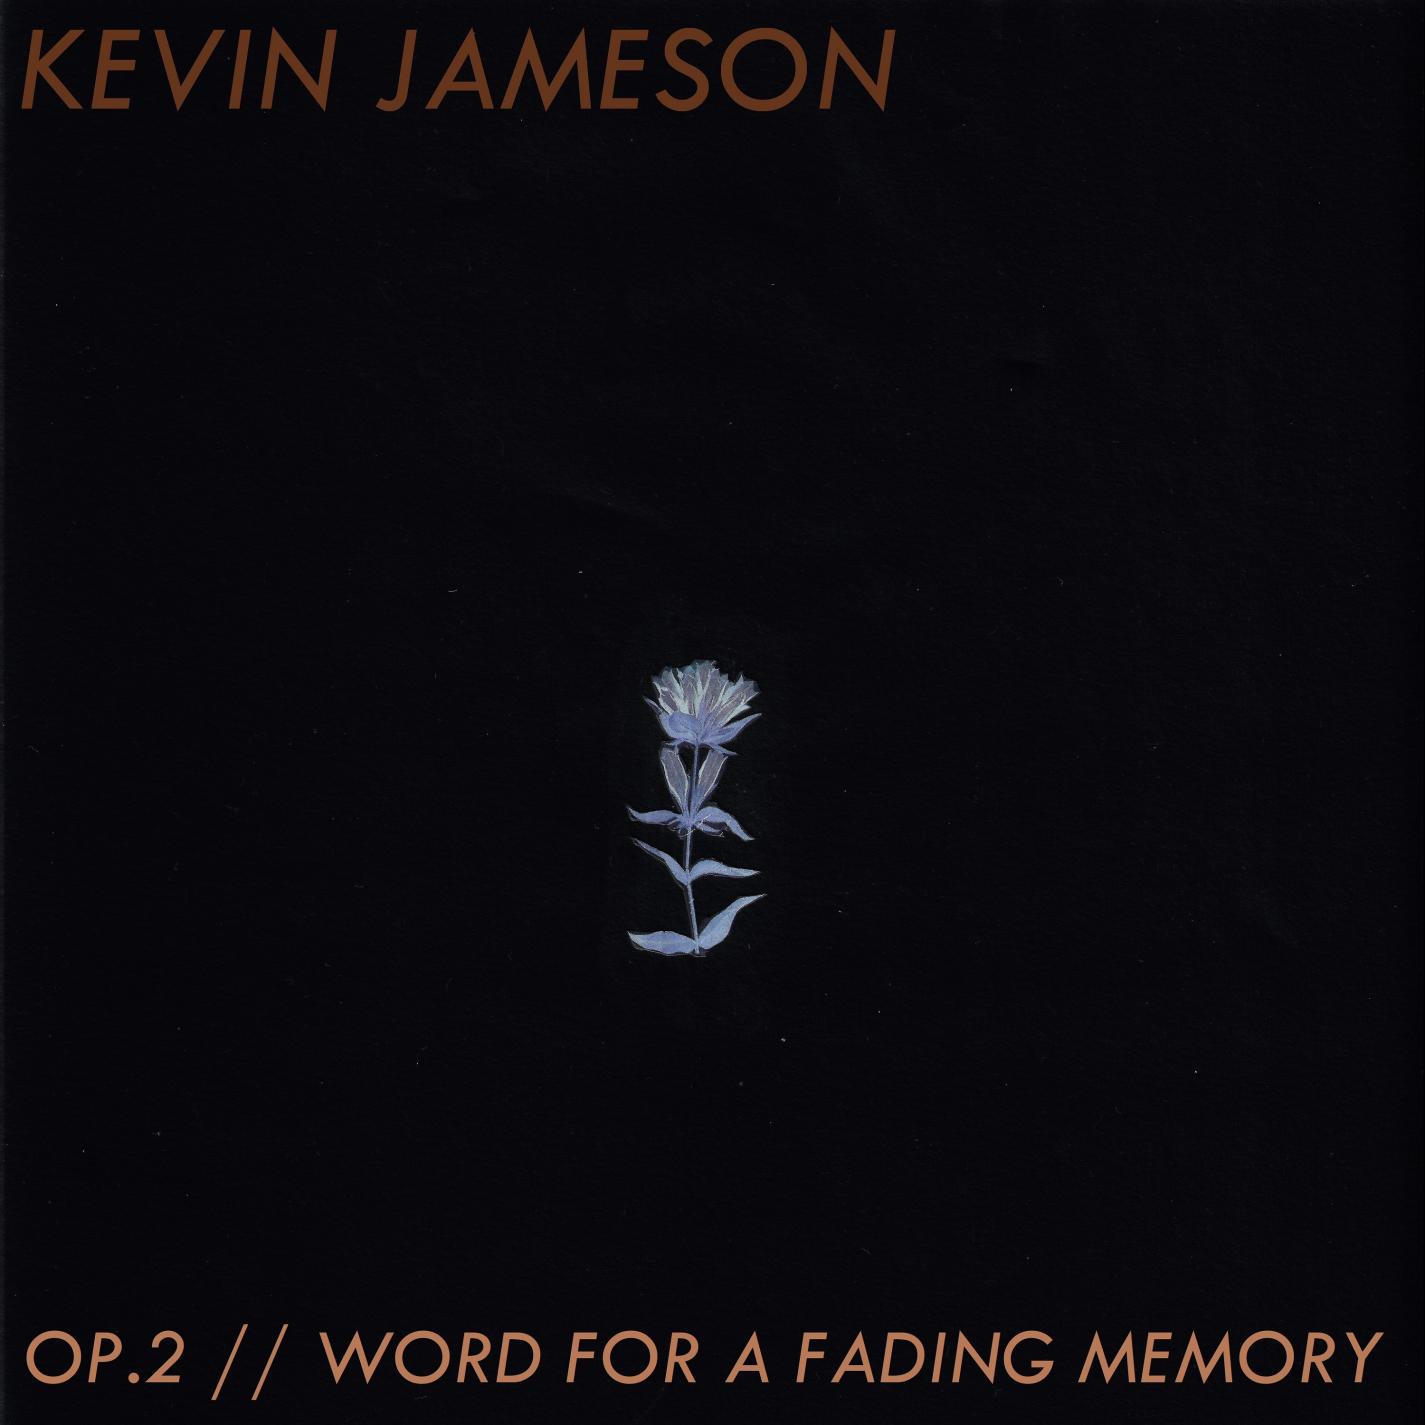 Op. 2: Word for a Fading Memory